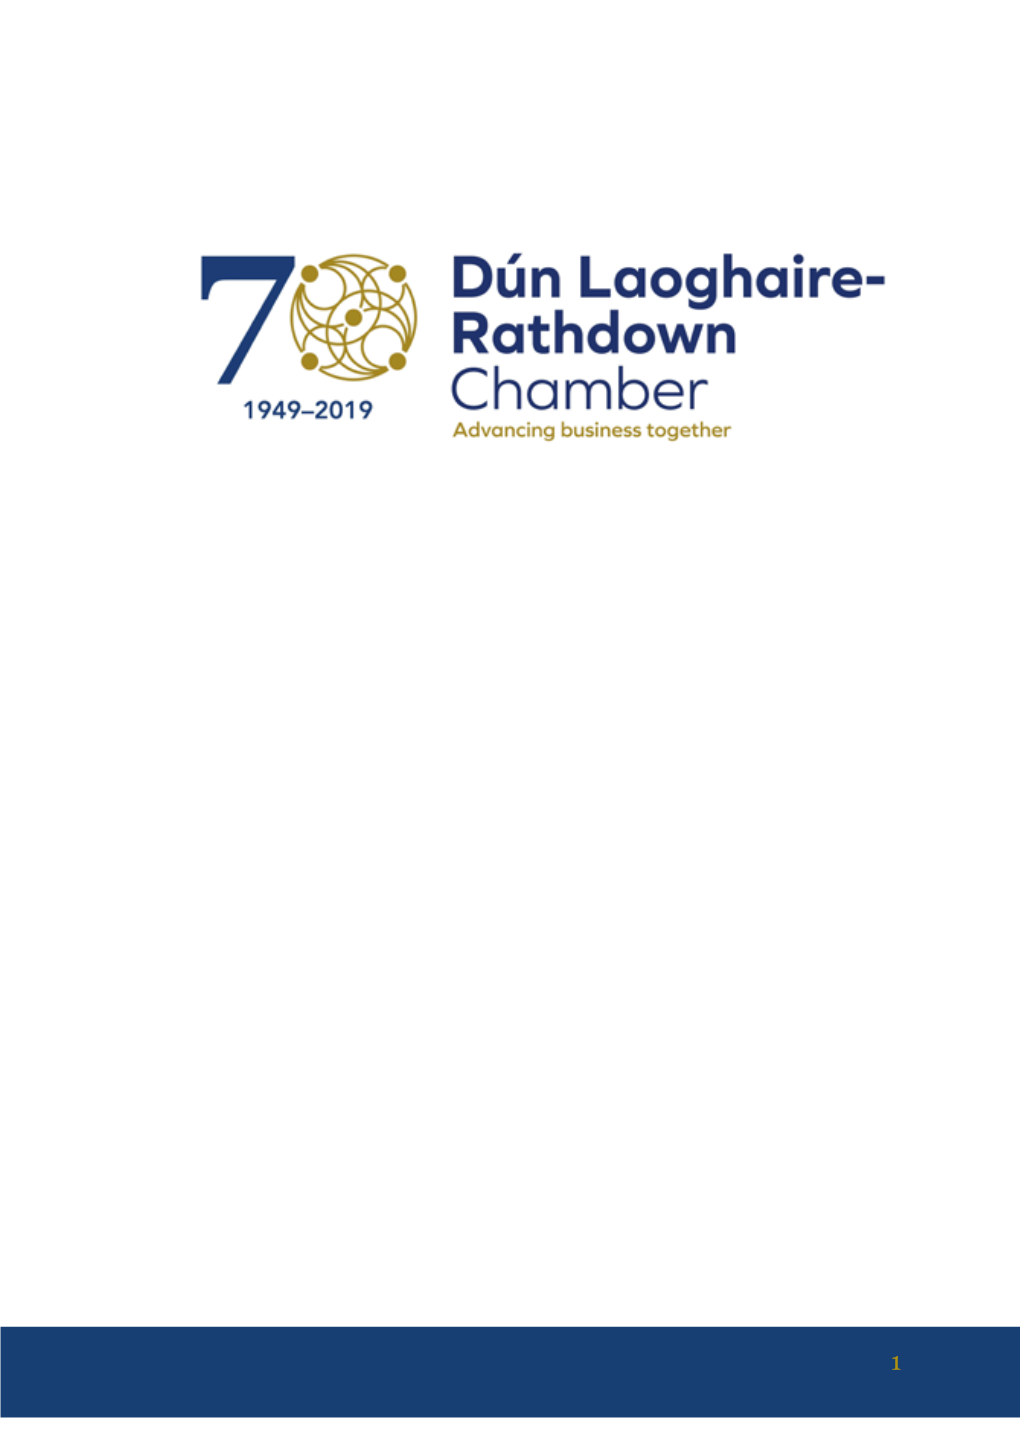 Dún Laoghaire-Rathdown Chamber 70 Years of History 2019 Marks a Special Anniversary for the Dún Laoghaire-Rathdown Chamber